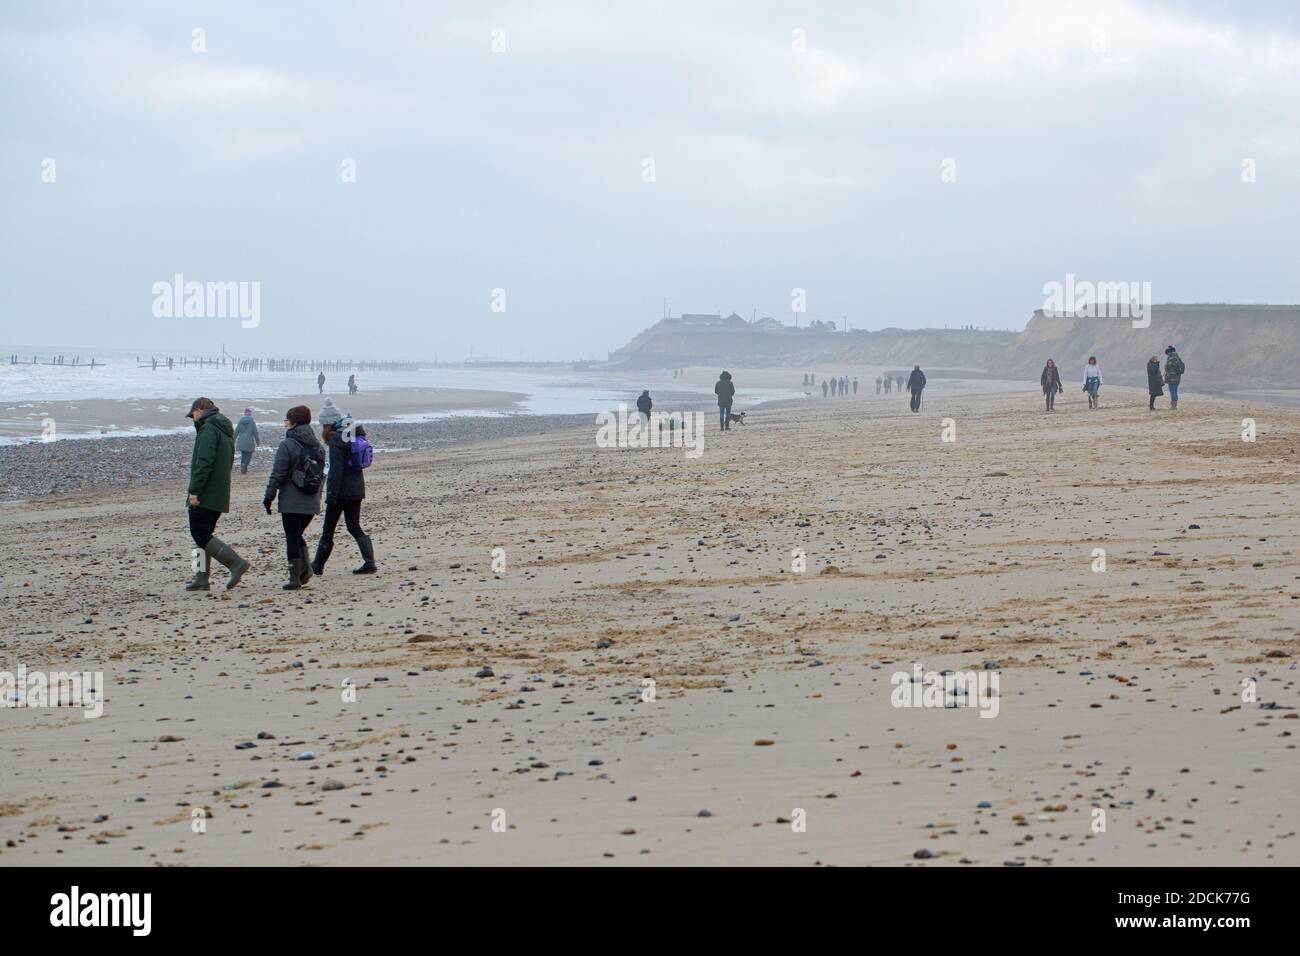 Winter weekend walkers, taking outdoor exercise on Happisburgh beach and coastline. Social distancing being respected. Norfolk. UK. Stock Photo